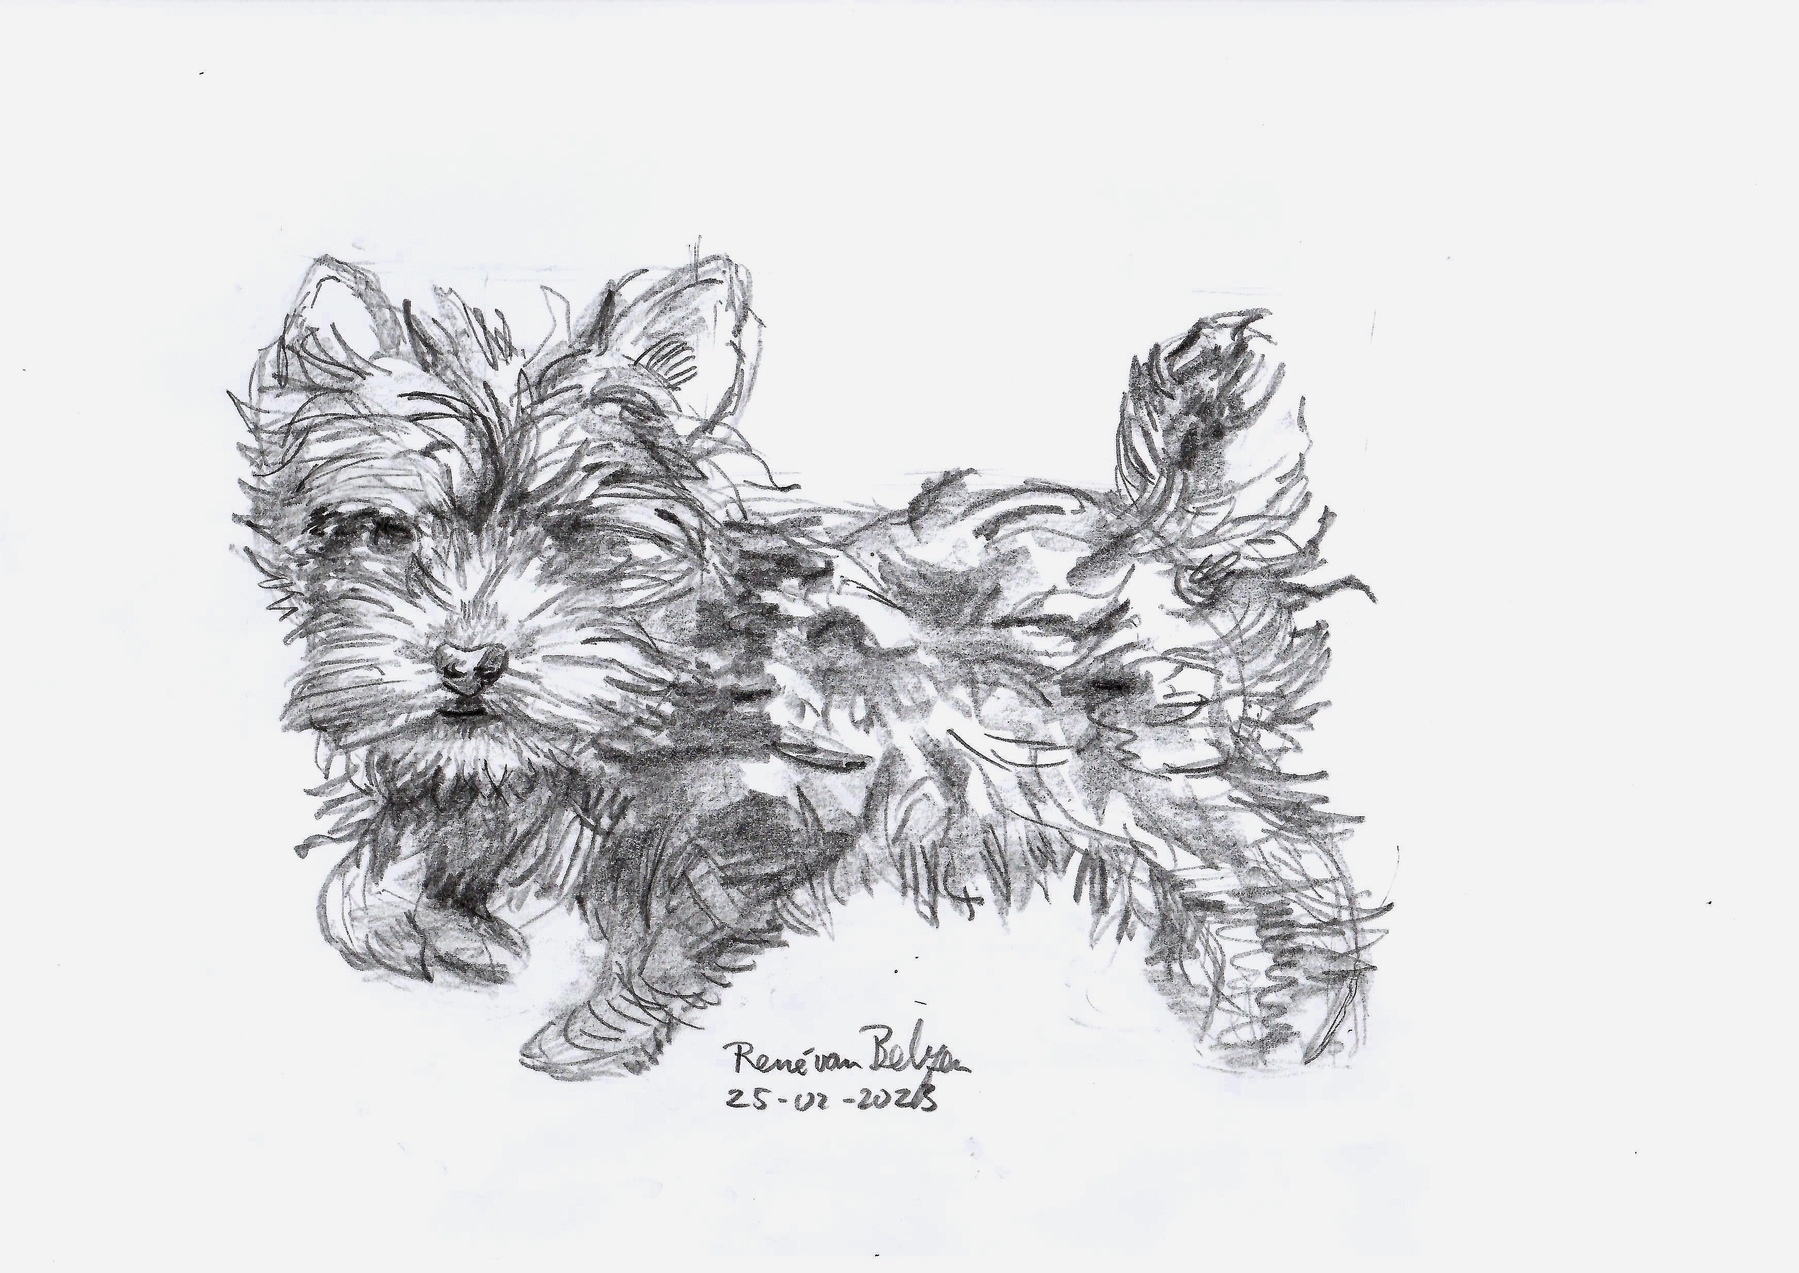 pencil sketch of a small dog